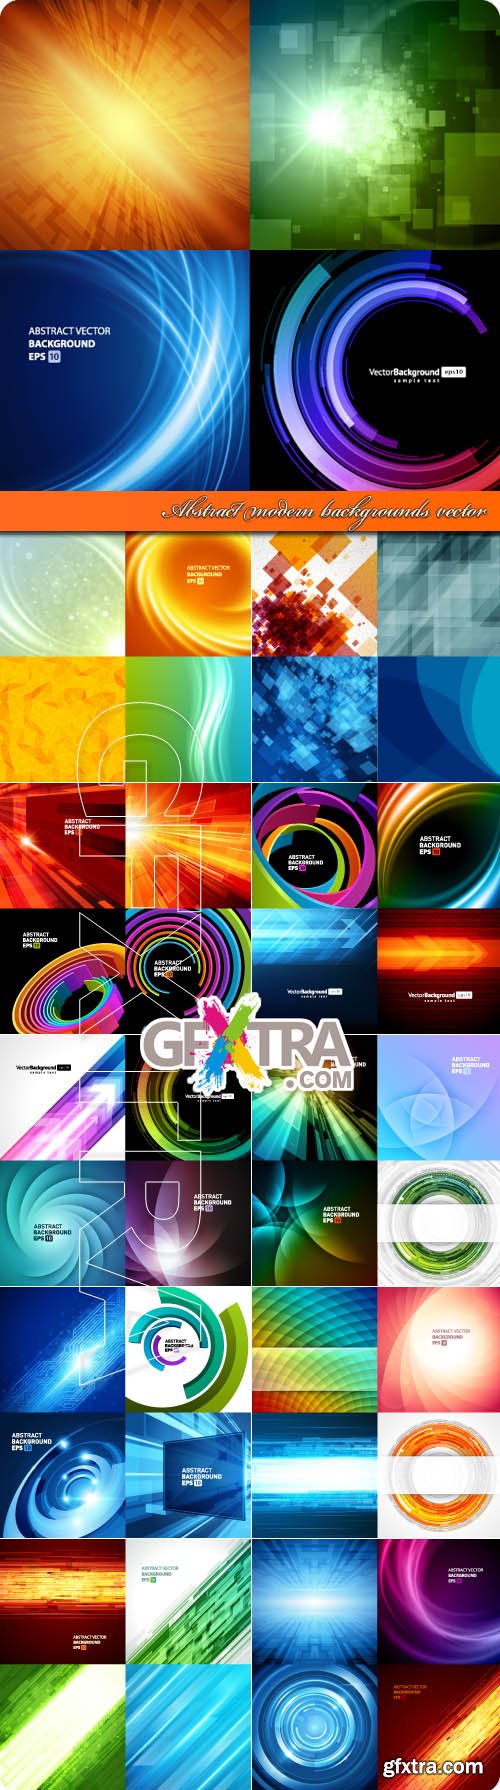 Abstract modern backgrounds vector